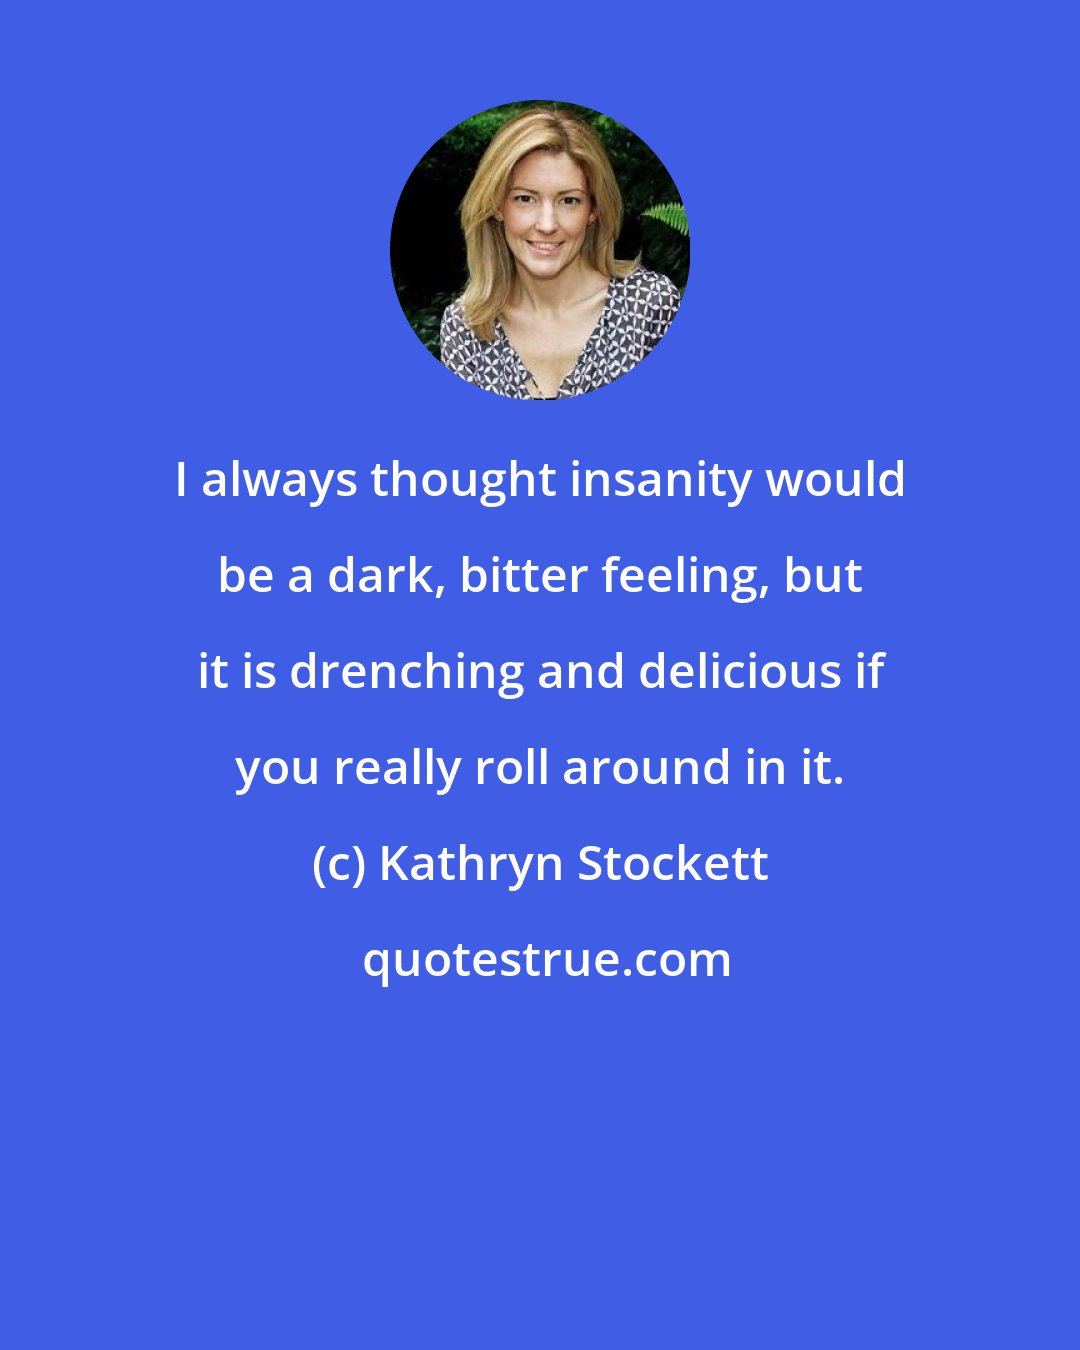 Kathryn Stockett: I always thought insanity would be a dark, bitter feeling, but it is drenching and delicious if you really roll around in it.